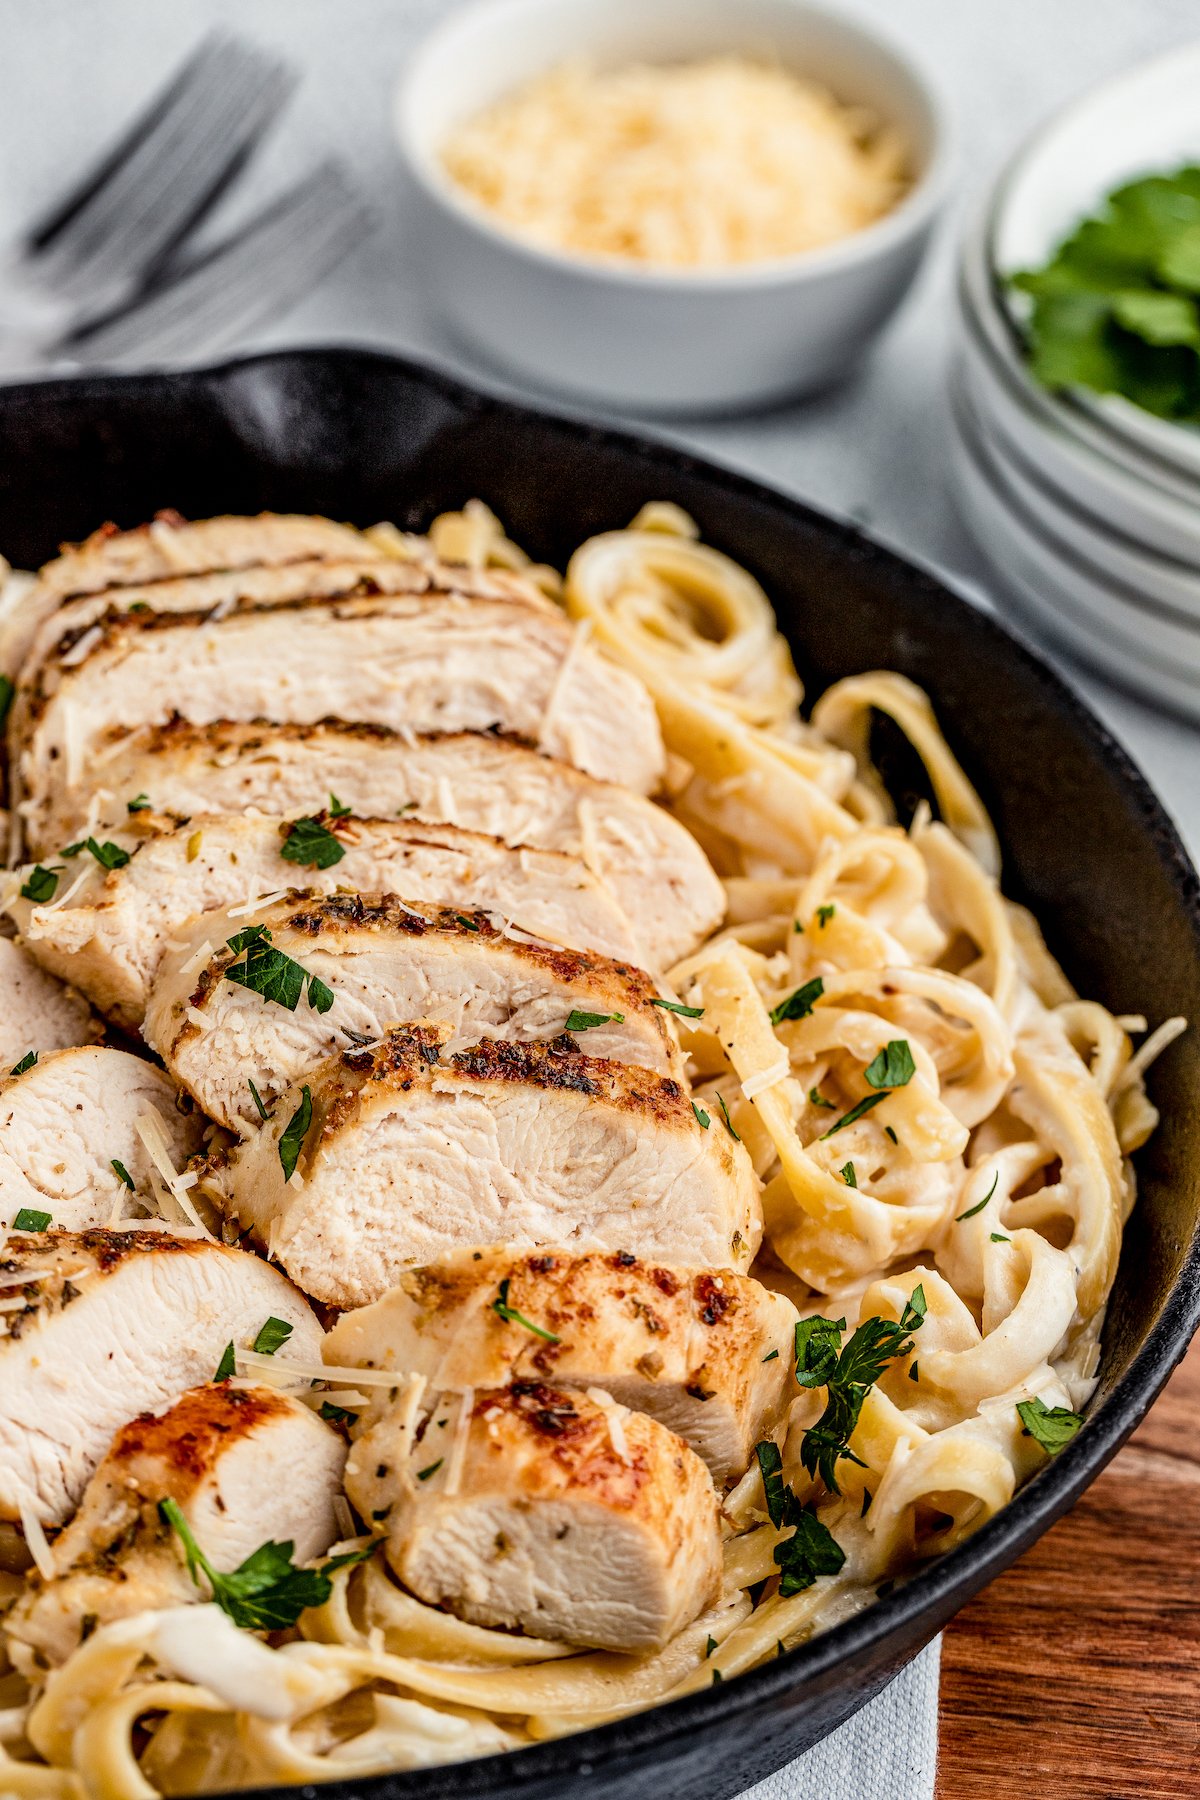 Chicken fettuccine alfredo, garnished with parsley, in a cast-iron skillet.